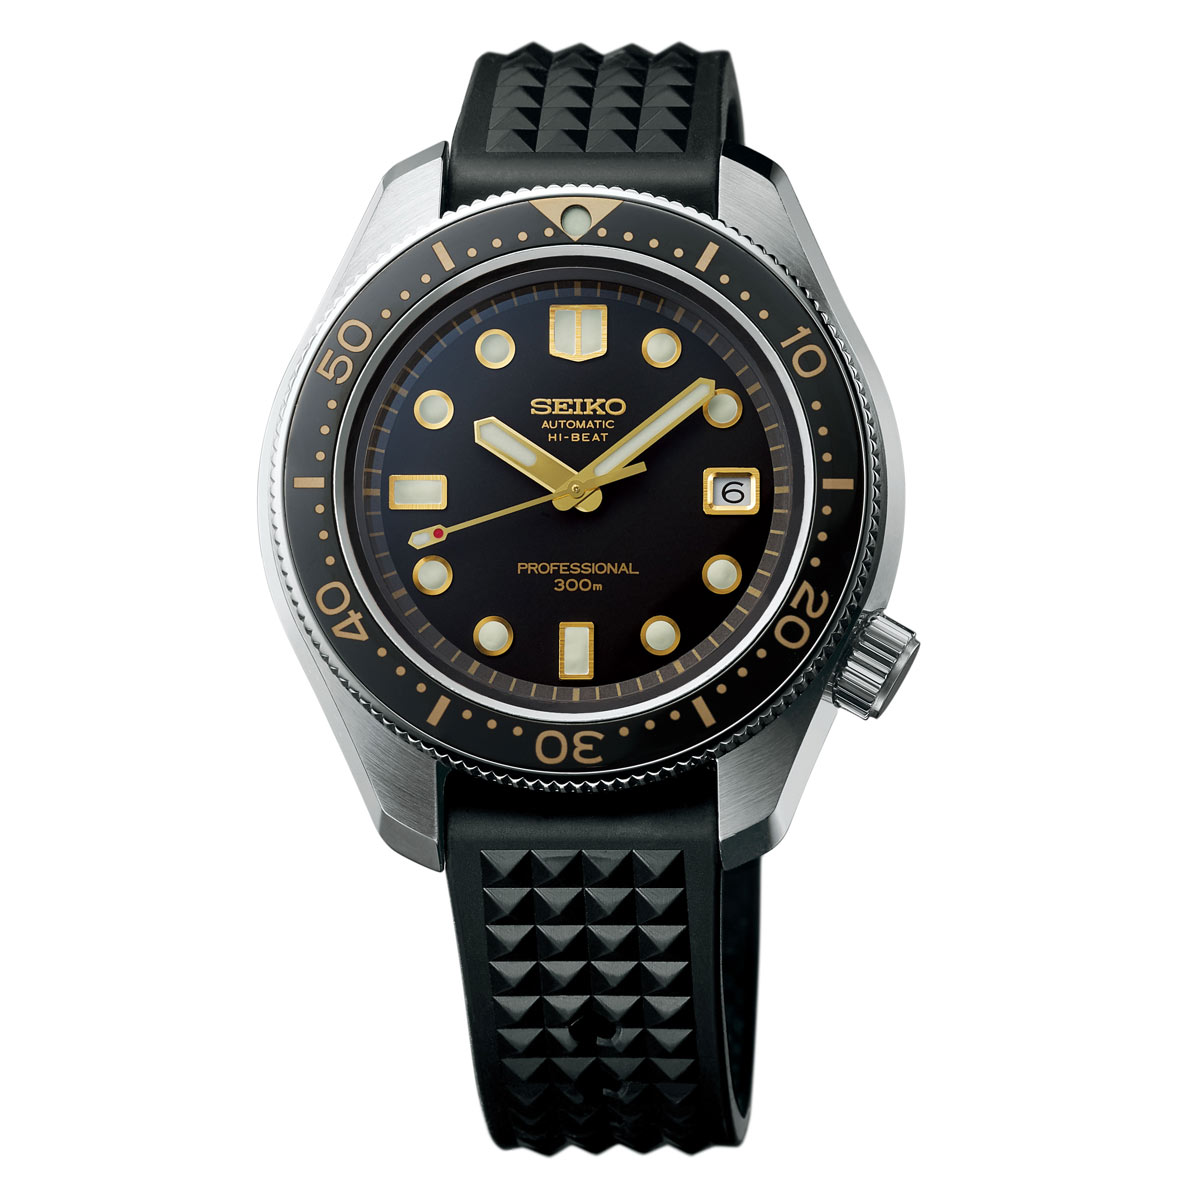 Seiko - Prospex “1968 Automatic Diver's” Limited Edition” Ref. SLA025J1 |  Time and Watches | The watch blog